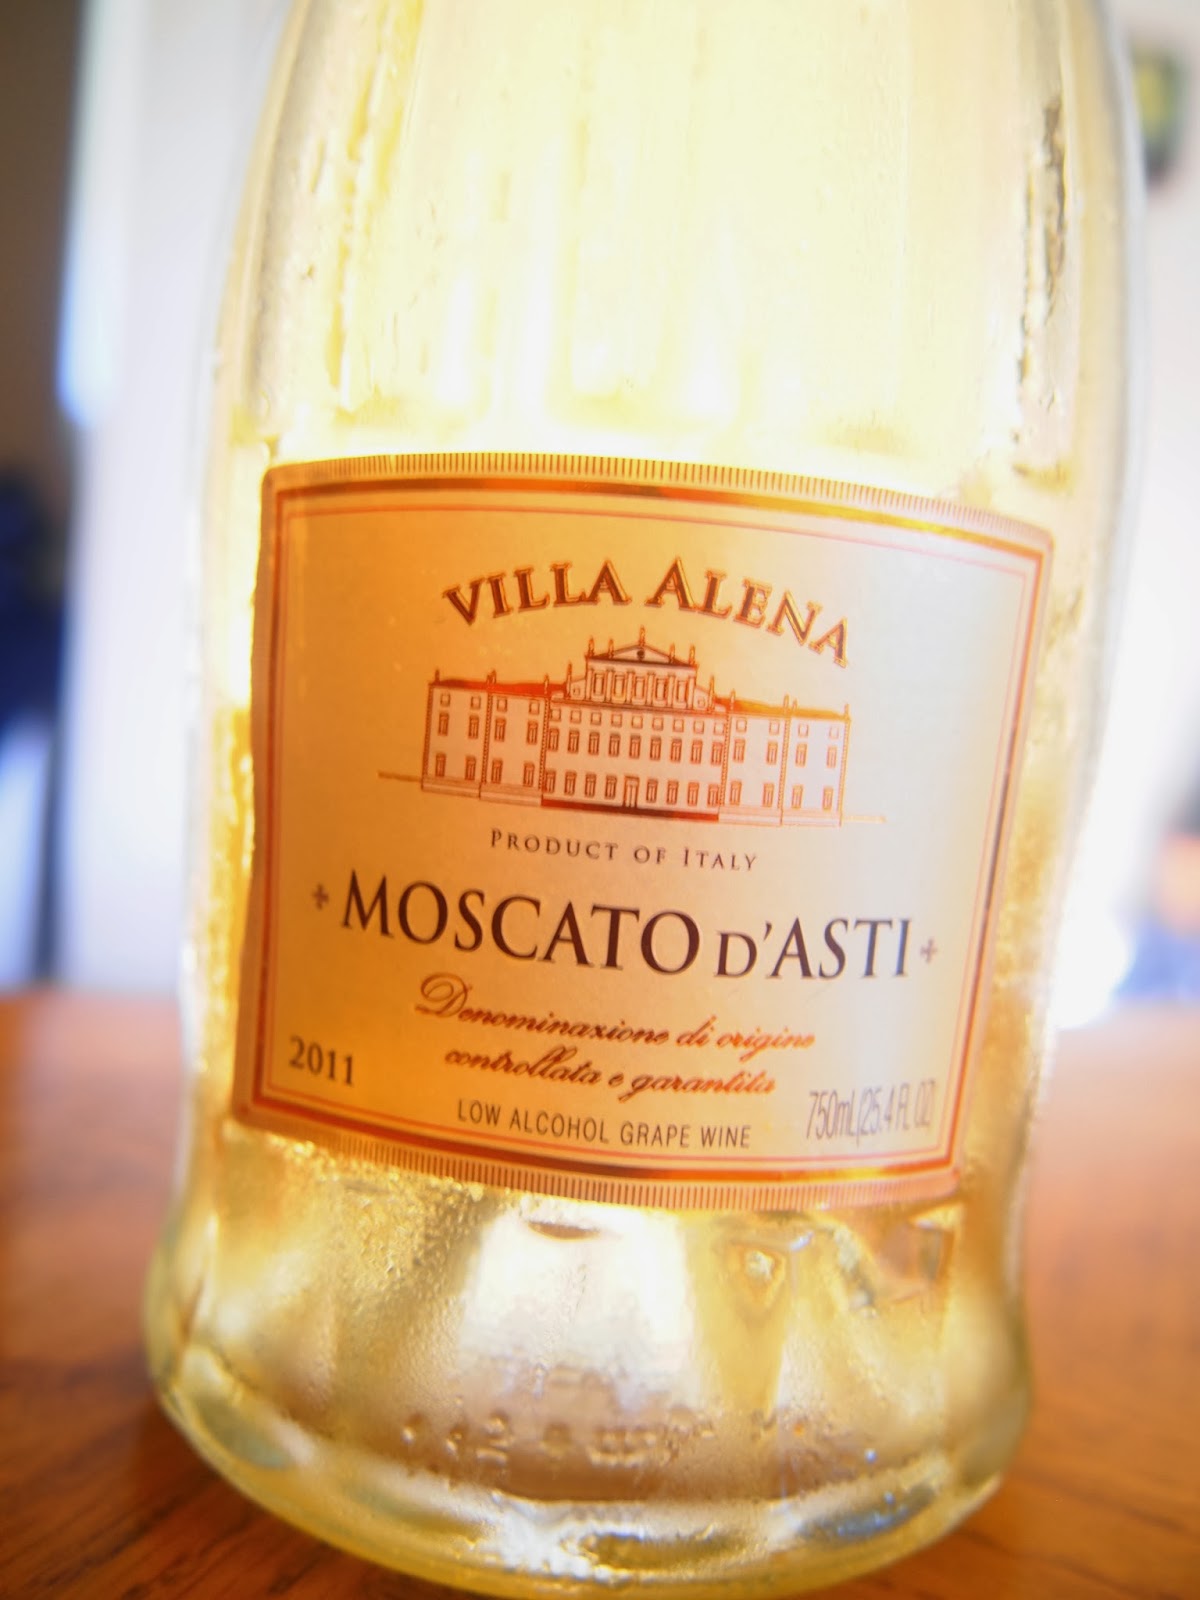 Sasaki Time Thumbs Up Wine Mobile App And Villa Alena Moscato D